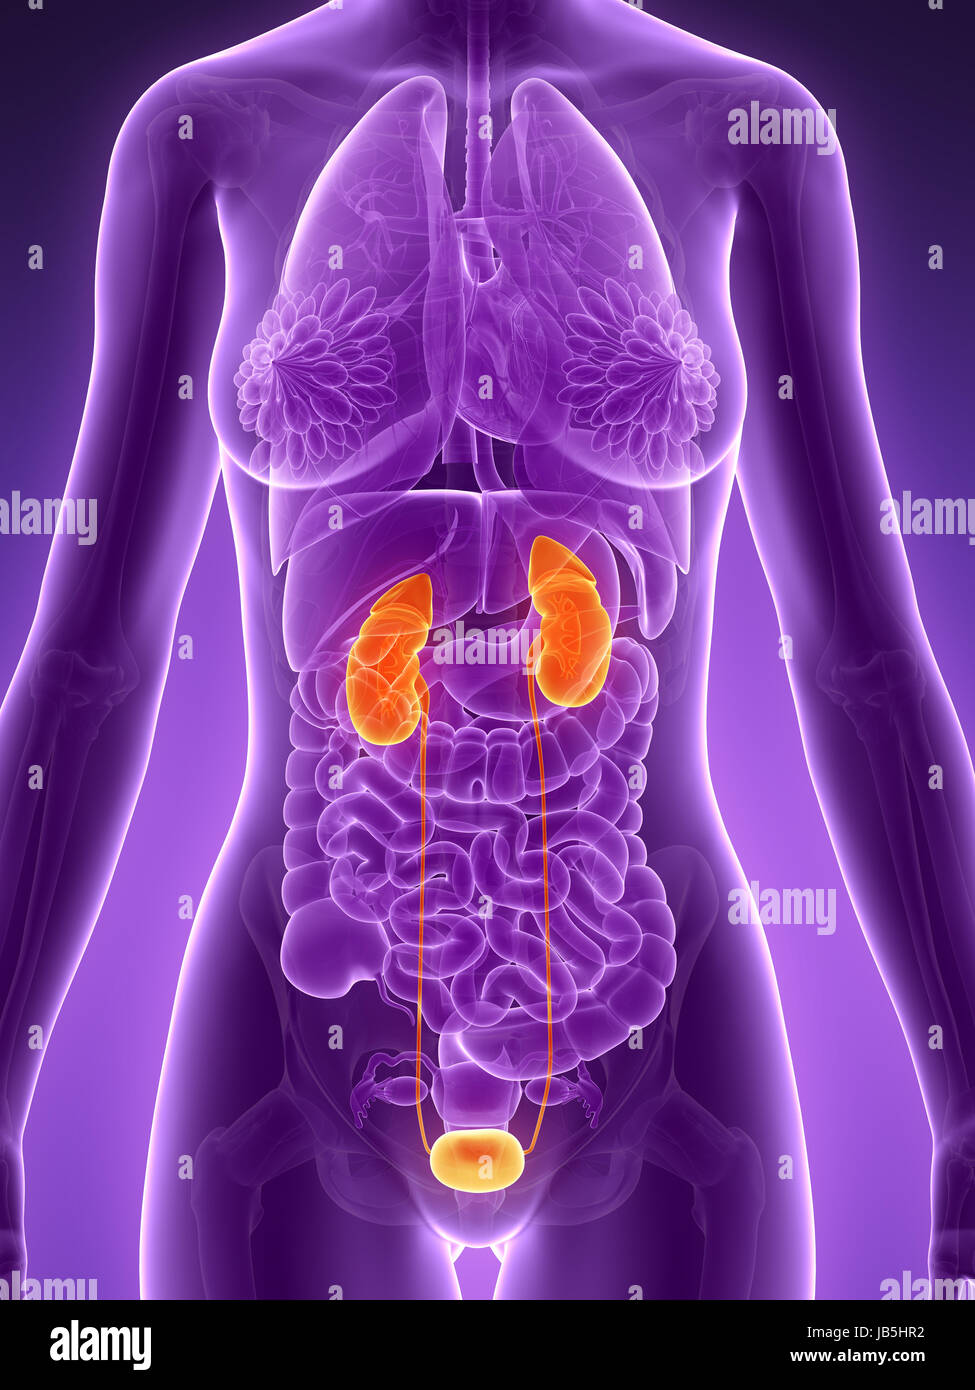 3d rendered illustration - urinary system Stock Photo